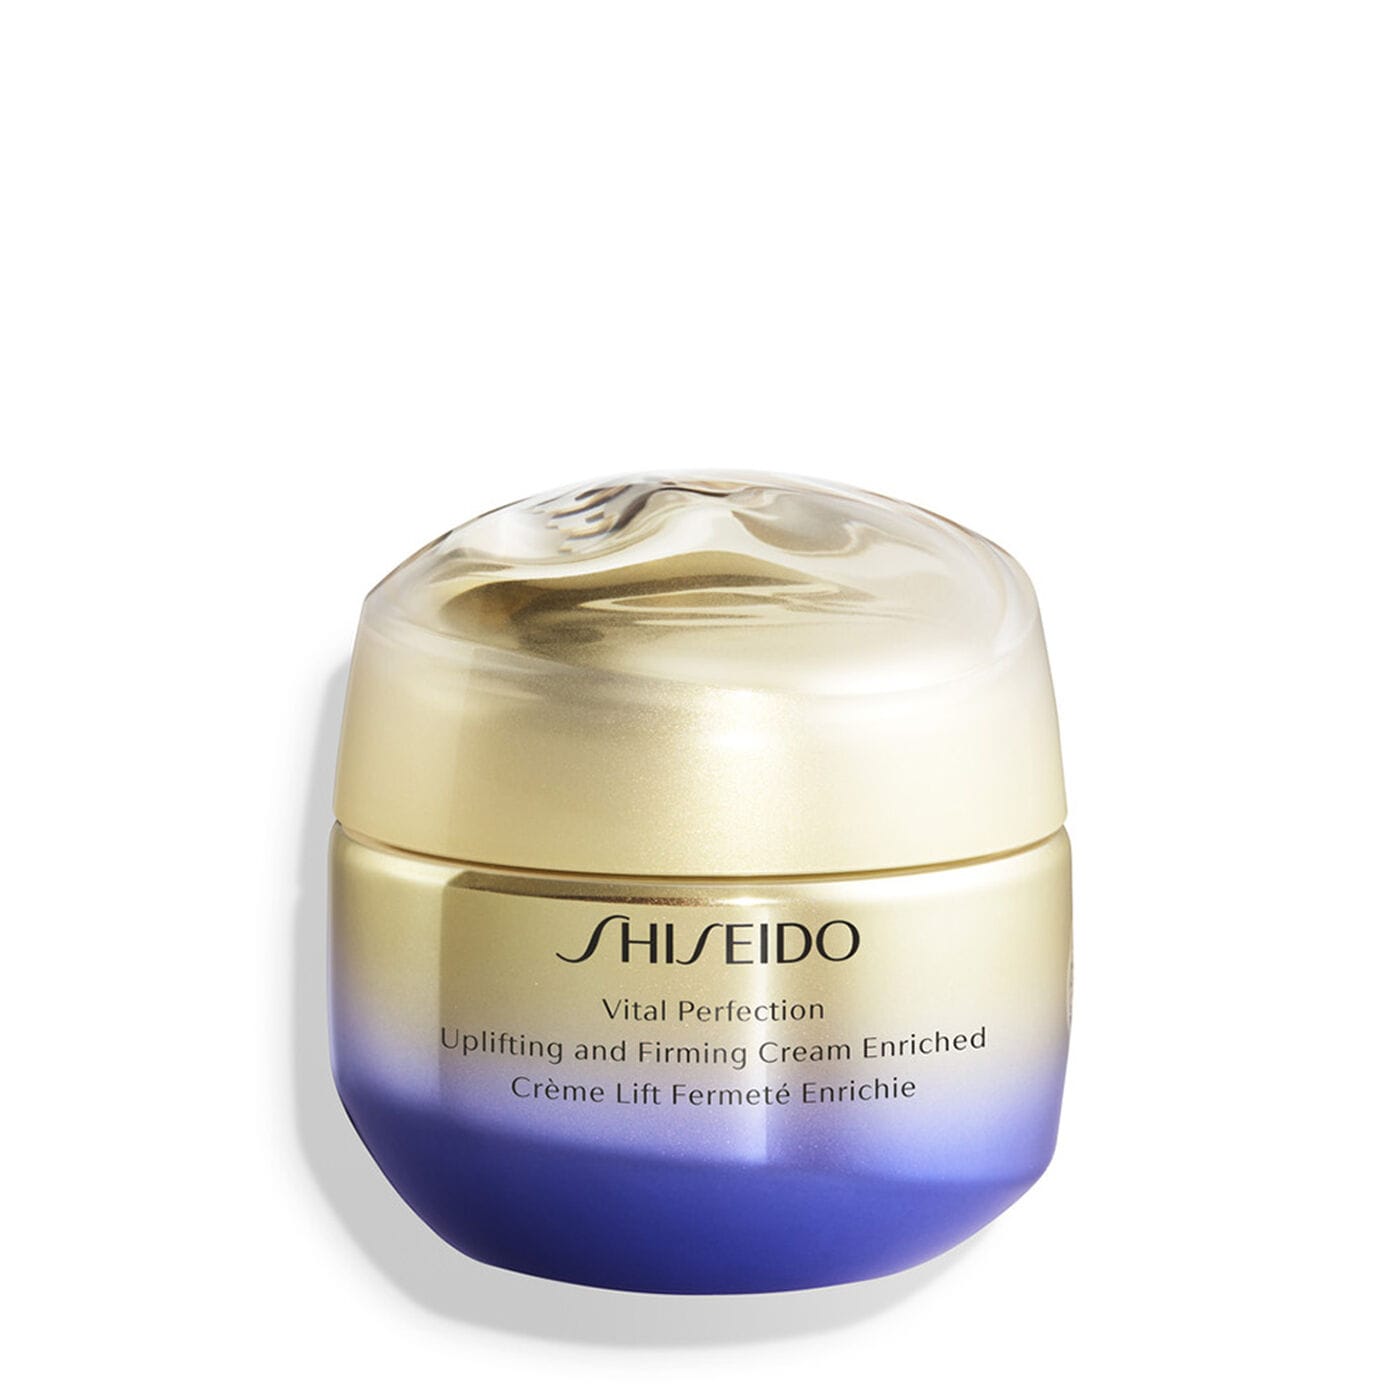 Shiseido-Uplifting and Firming Cream Enriched